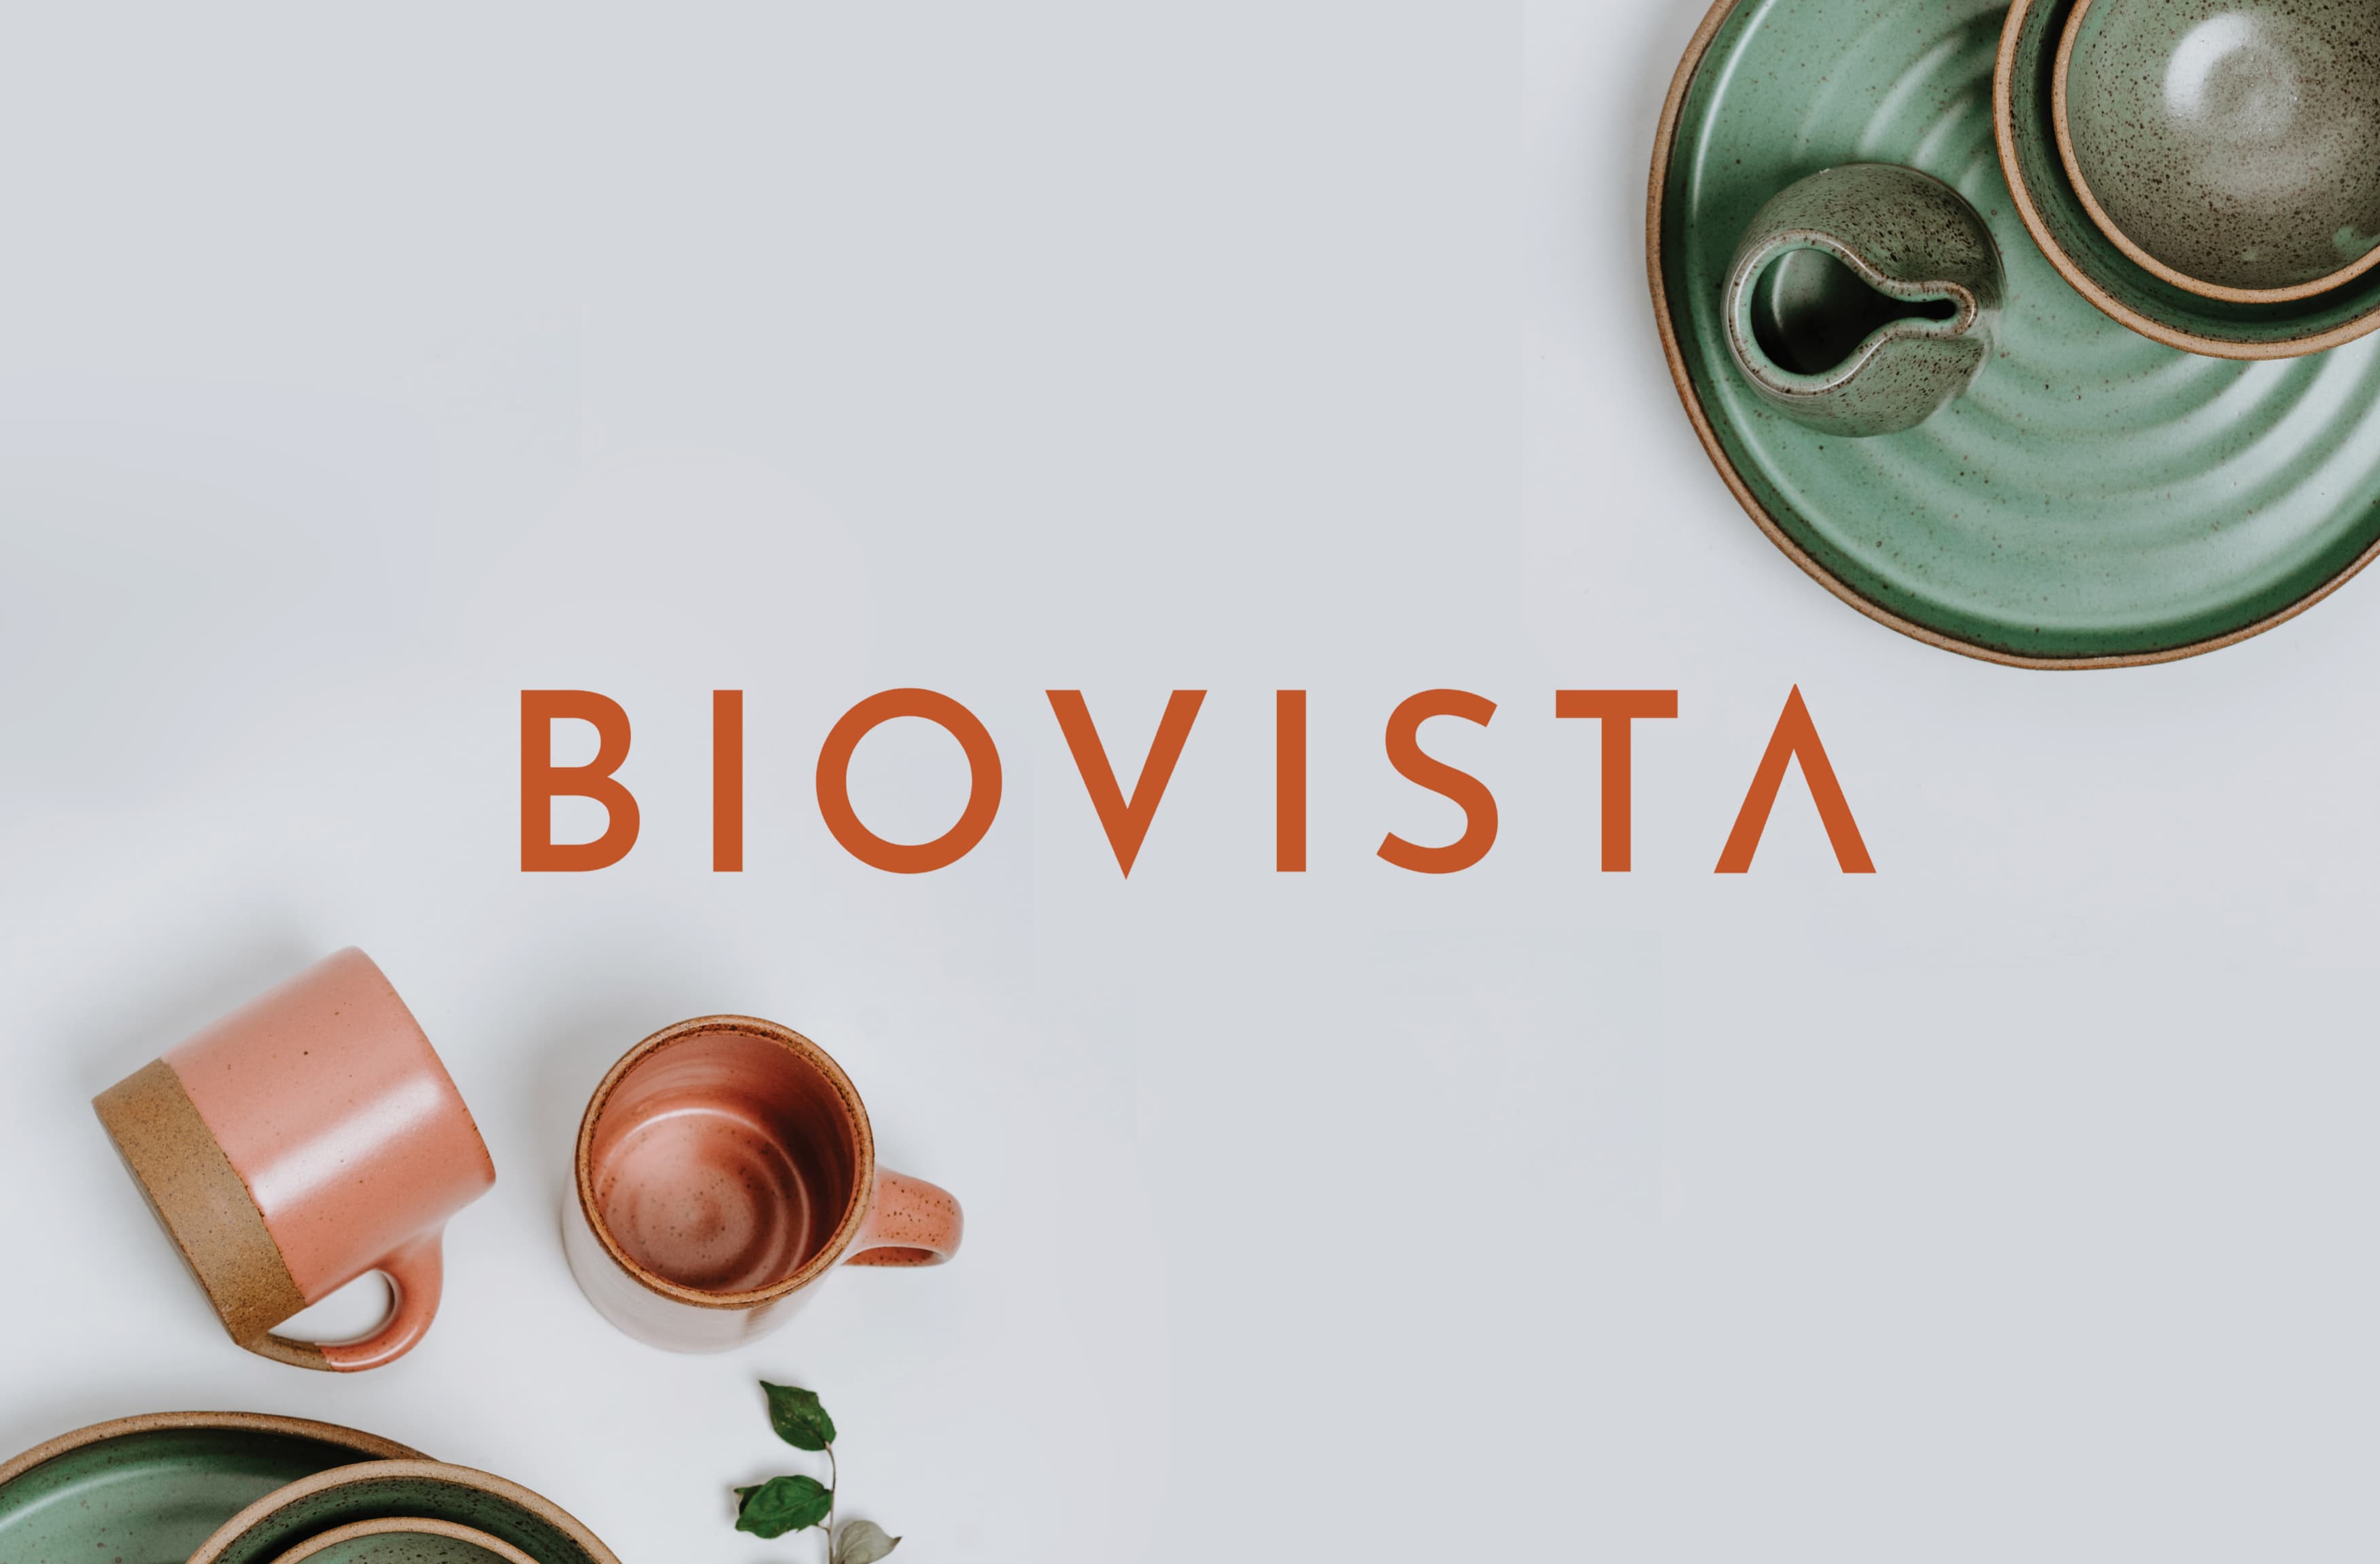 The Biovista logo against a colorful background with pottery and leaves. 